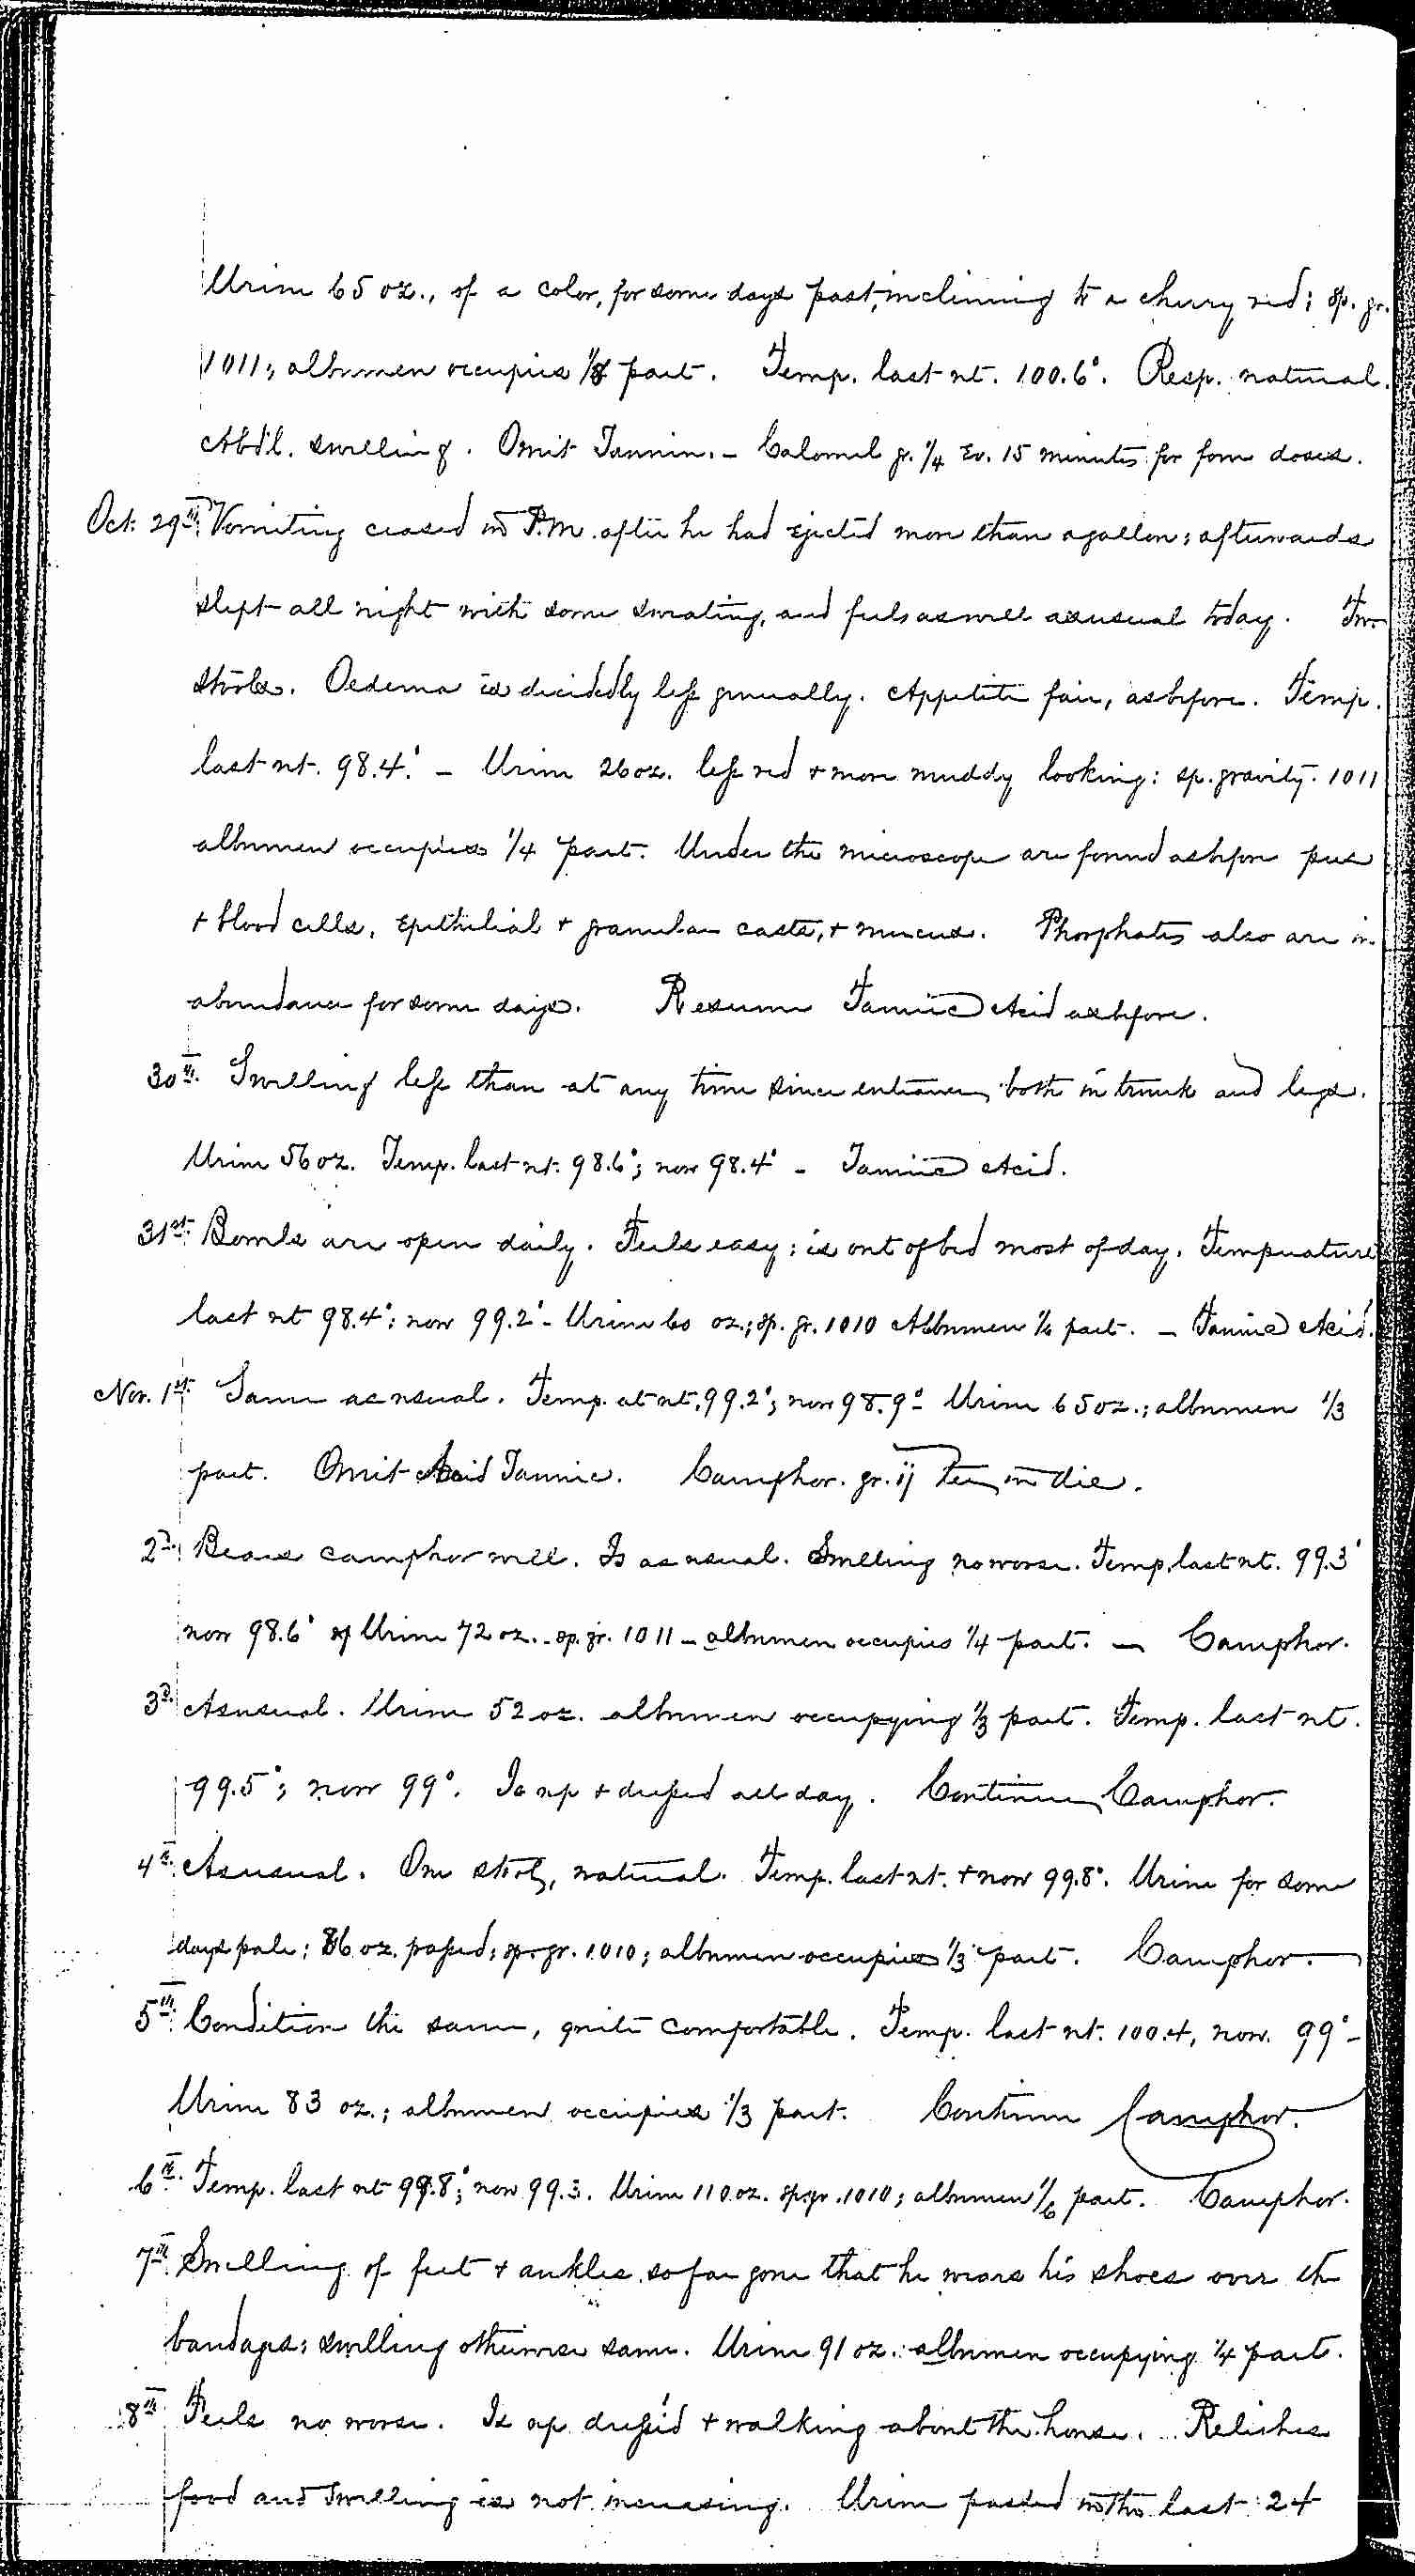 Entry for Bernard Coyne (page 8 of 13) in the log Hospital Tickets and Case Papers - Naval Hospital - Washington, D.C. - 1868-69